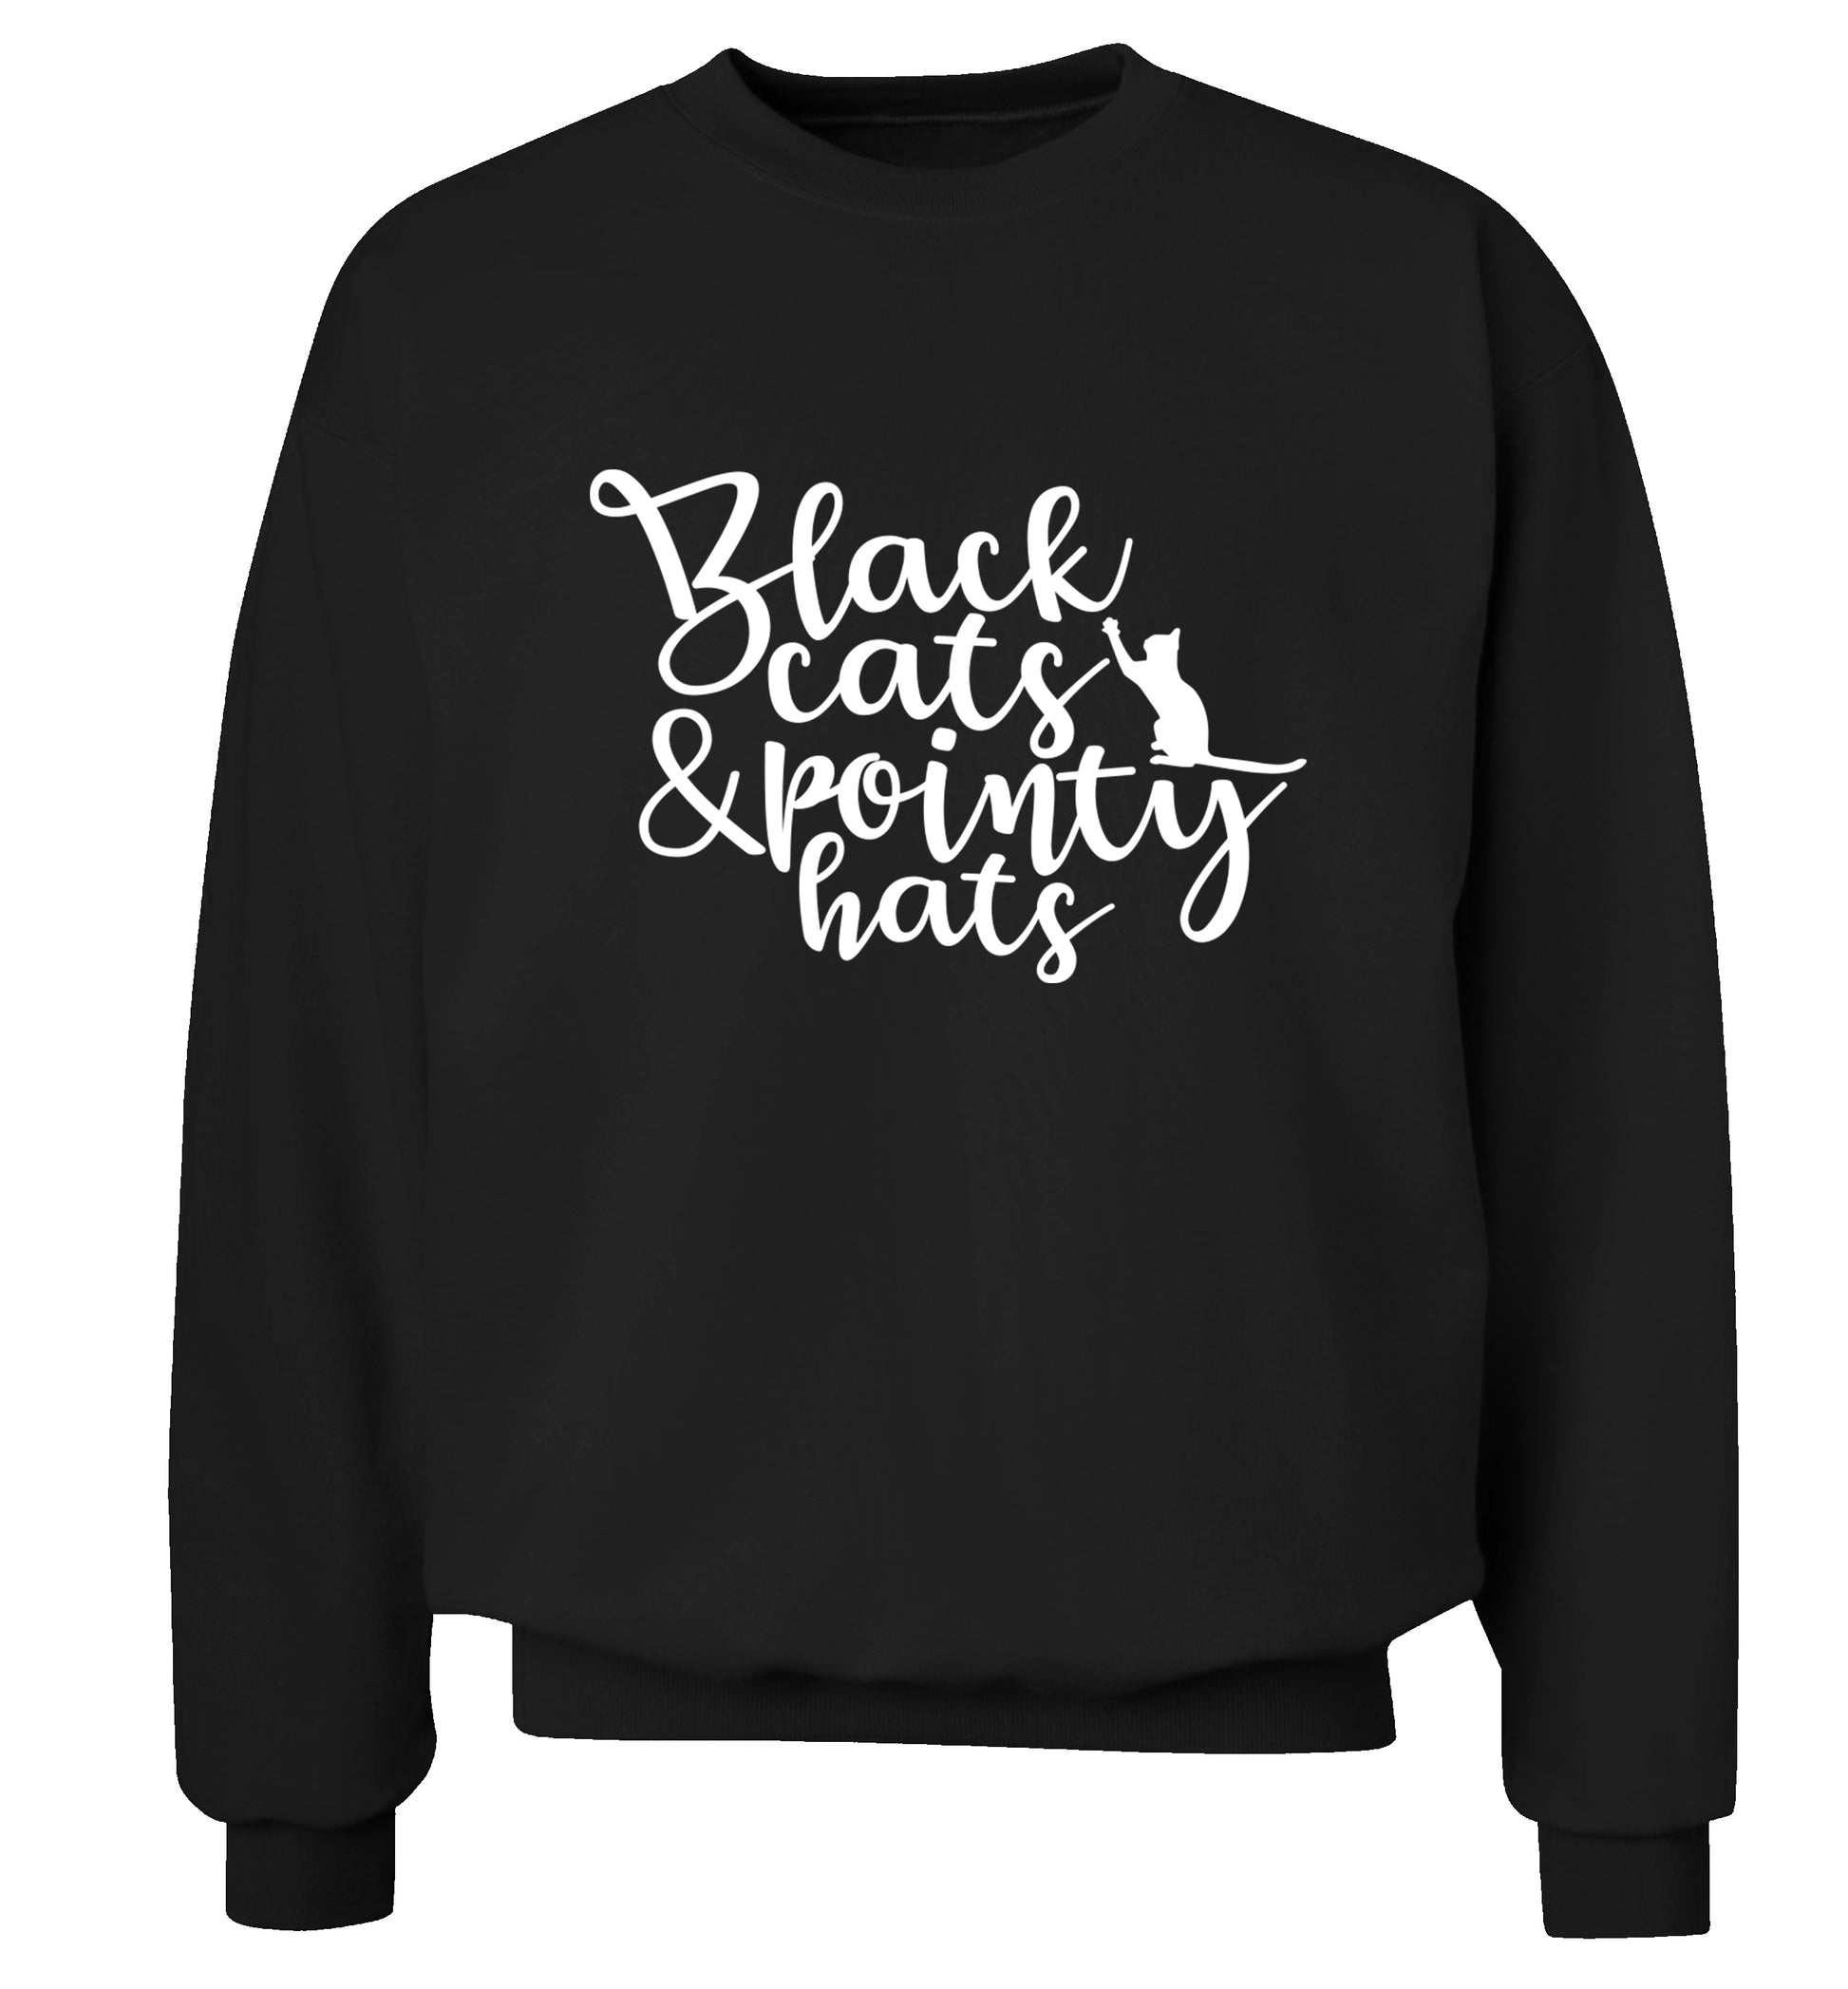 Black cats and pointy hats Adult's unisex black Sweater 2XL